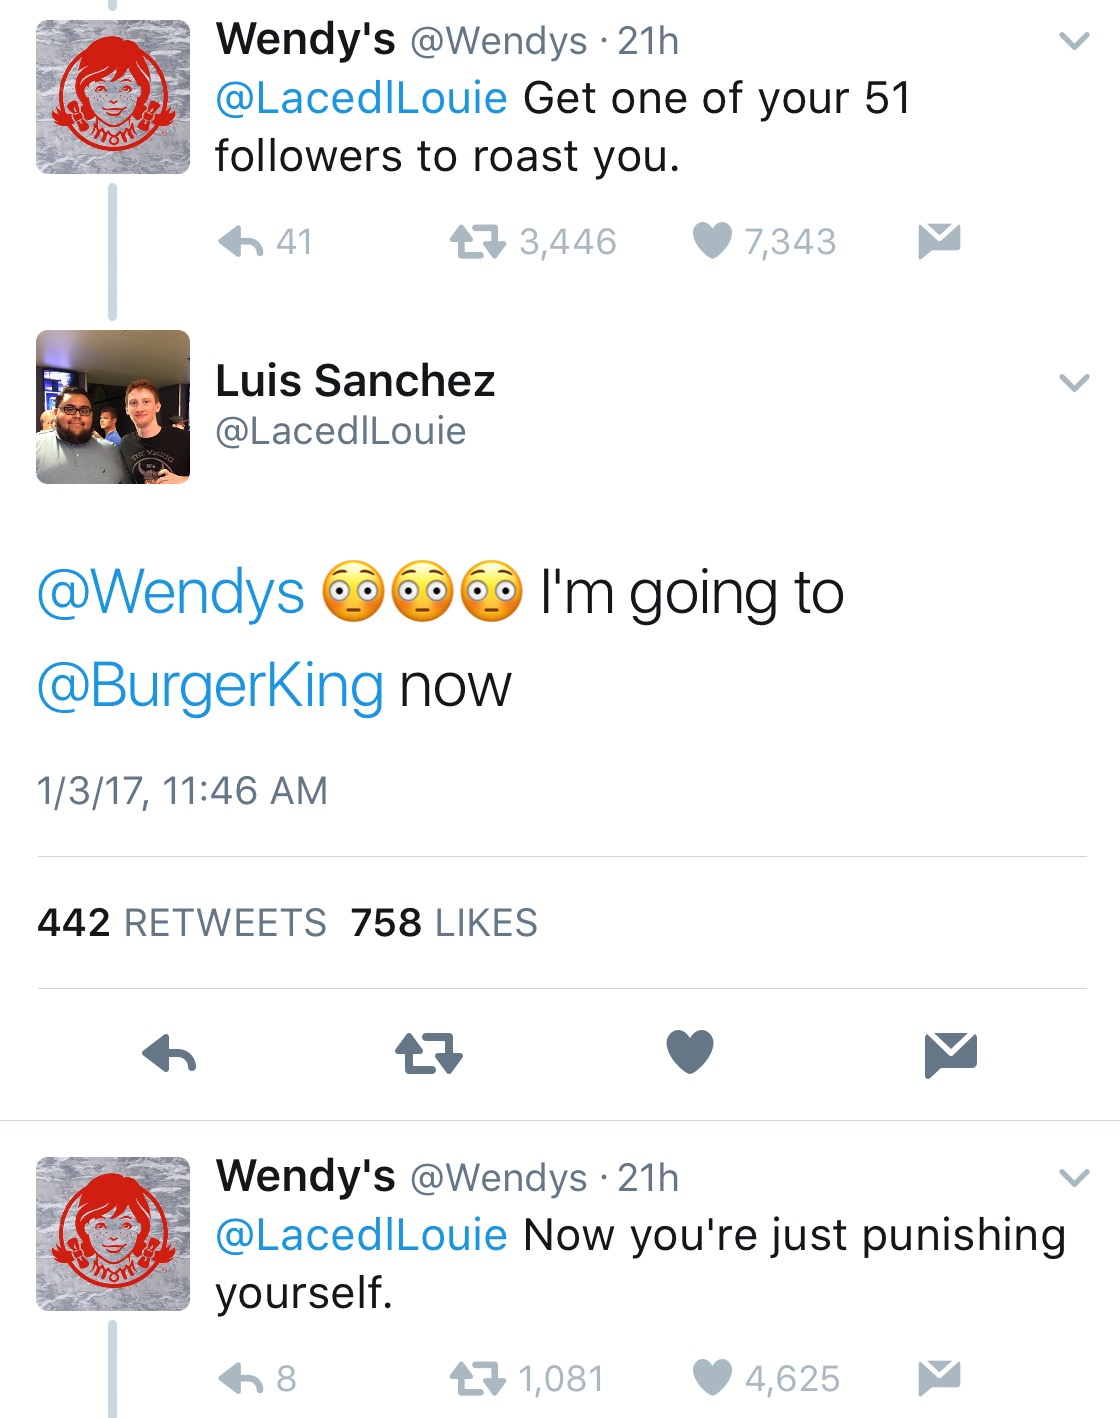 wendy tweeta - Wendy's 21h Get one of your 51 ers to roast you. 641 273,446 7,343 Luis Sanchez I'm going to now 1317, 442 758 Wendy's 21h Now you're just punishing yourself. 68 27 1,081 4,625 V